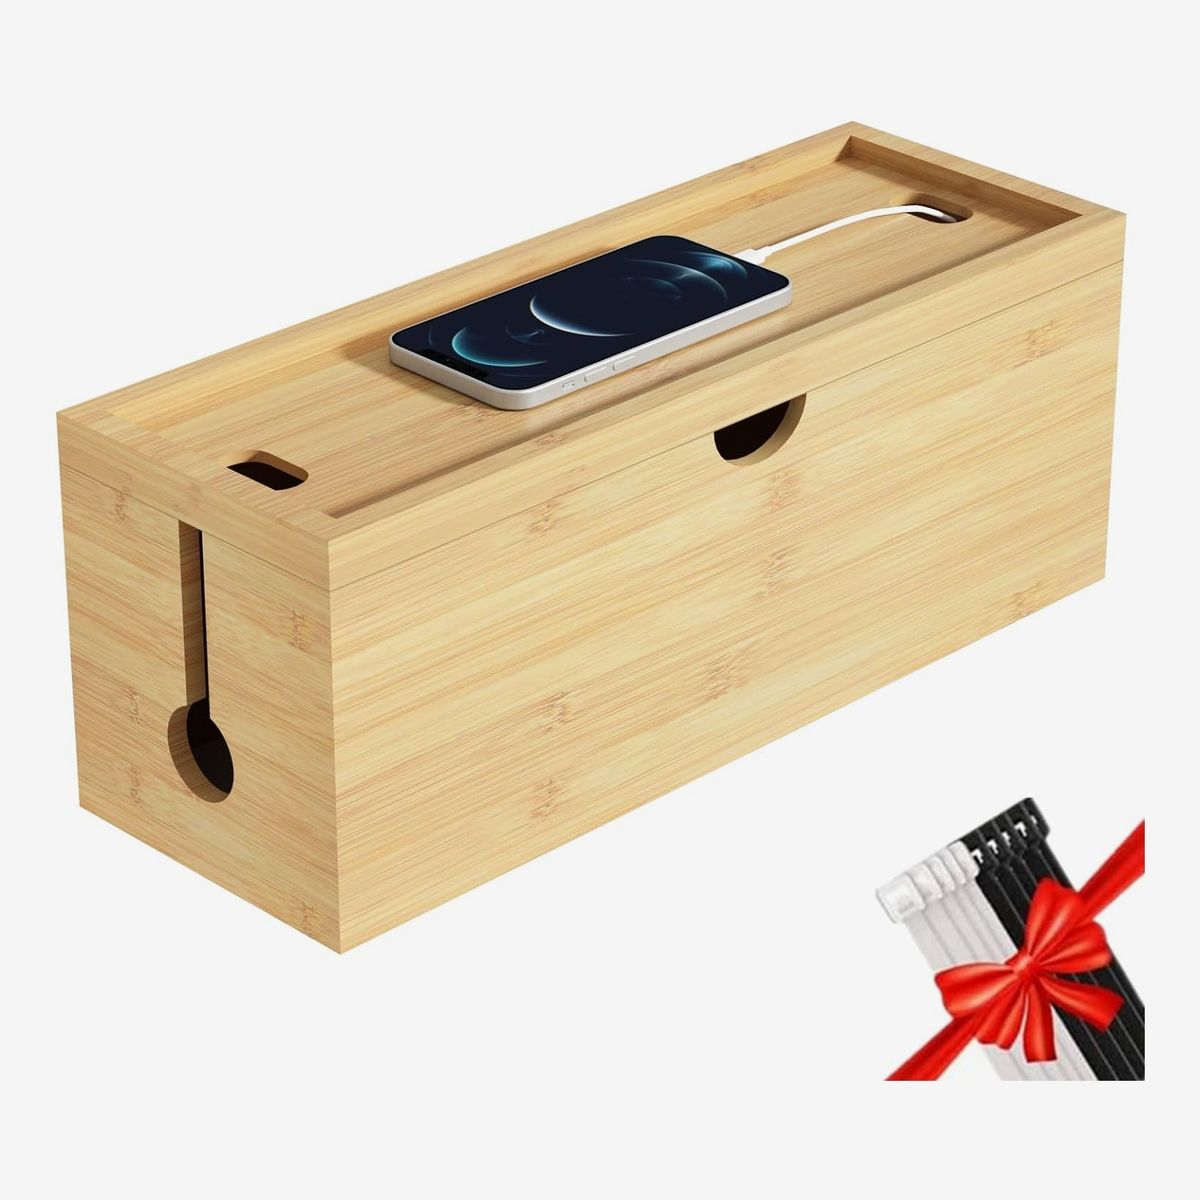 HoVoit Store Bamboo Cable Management Box